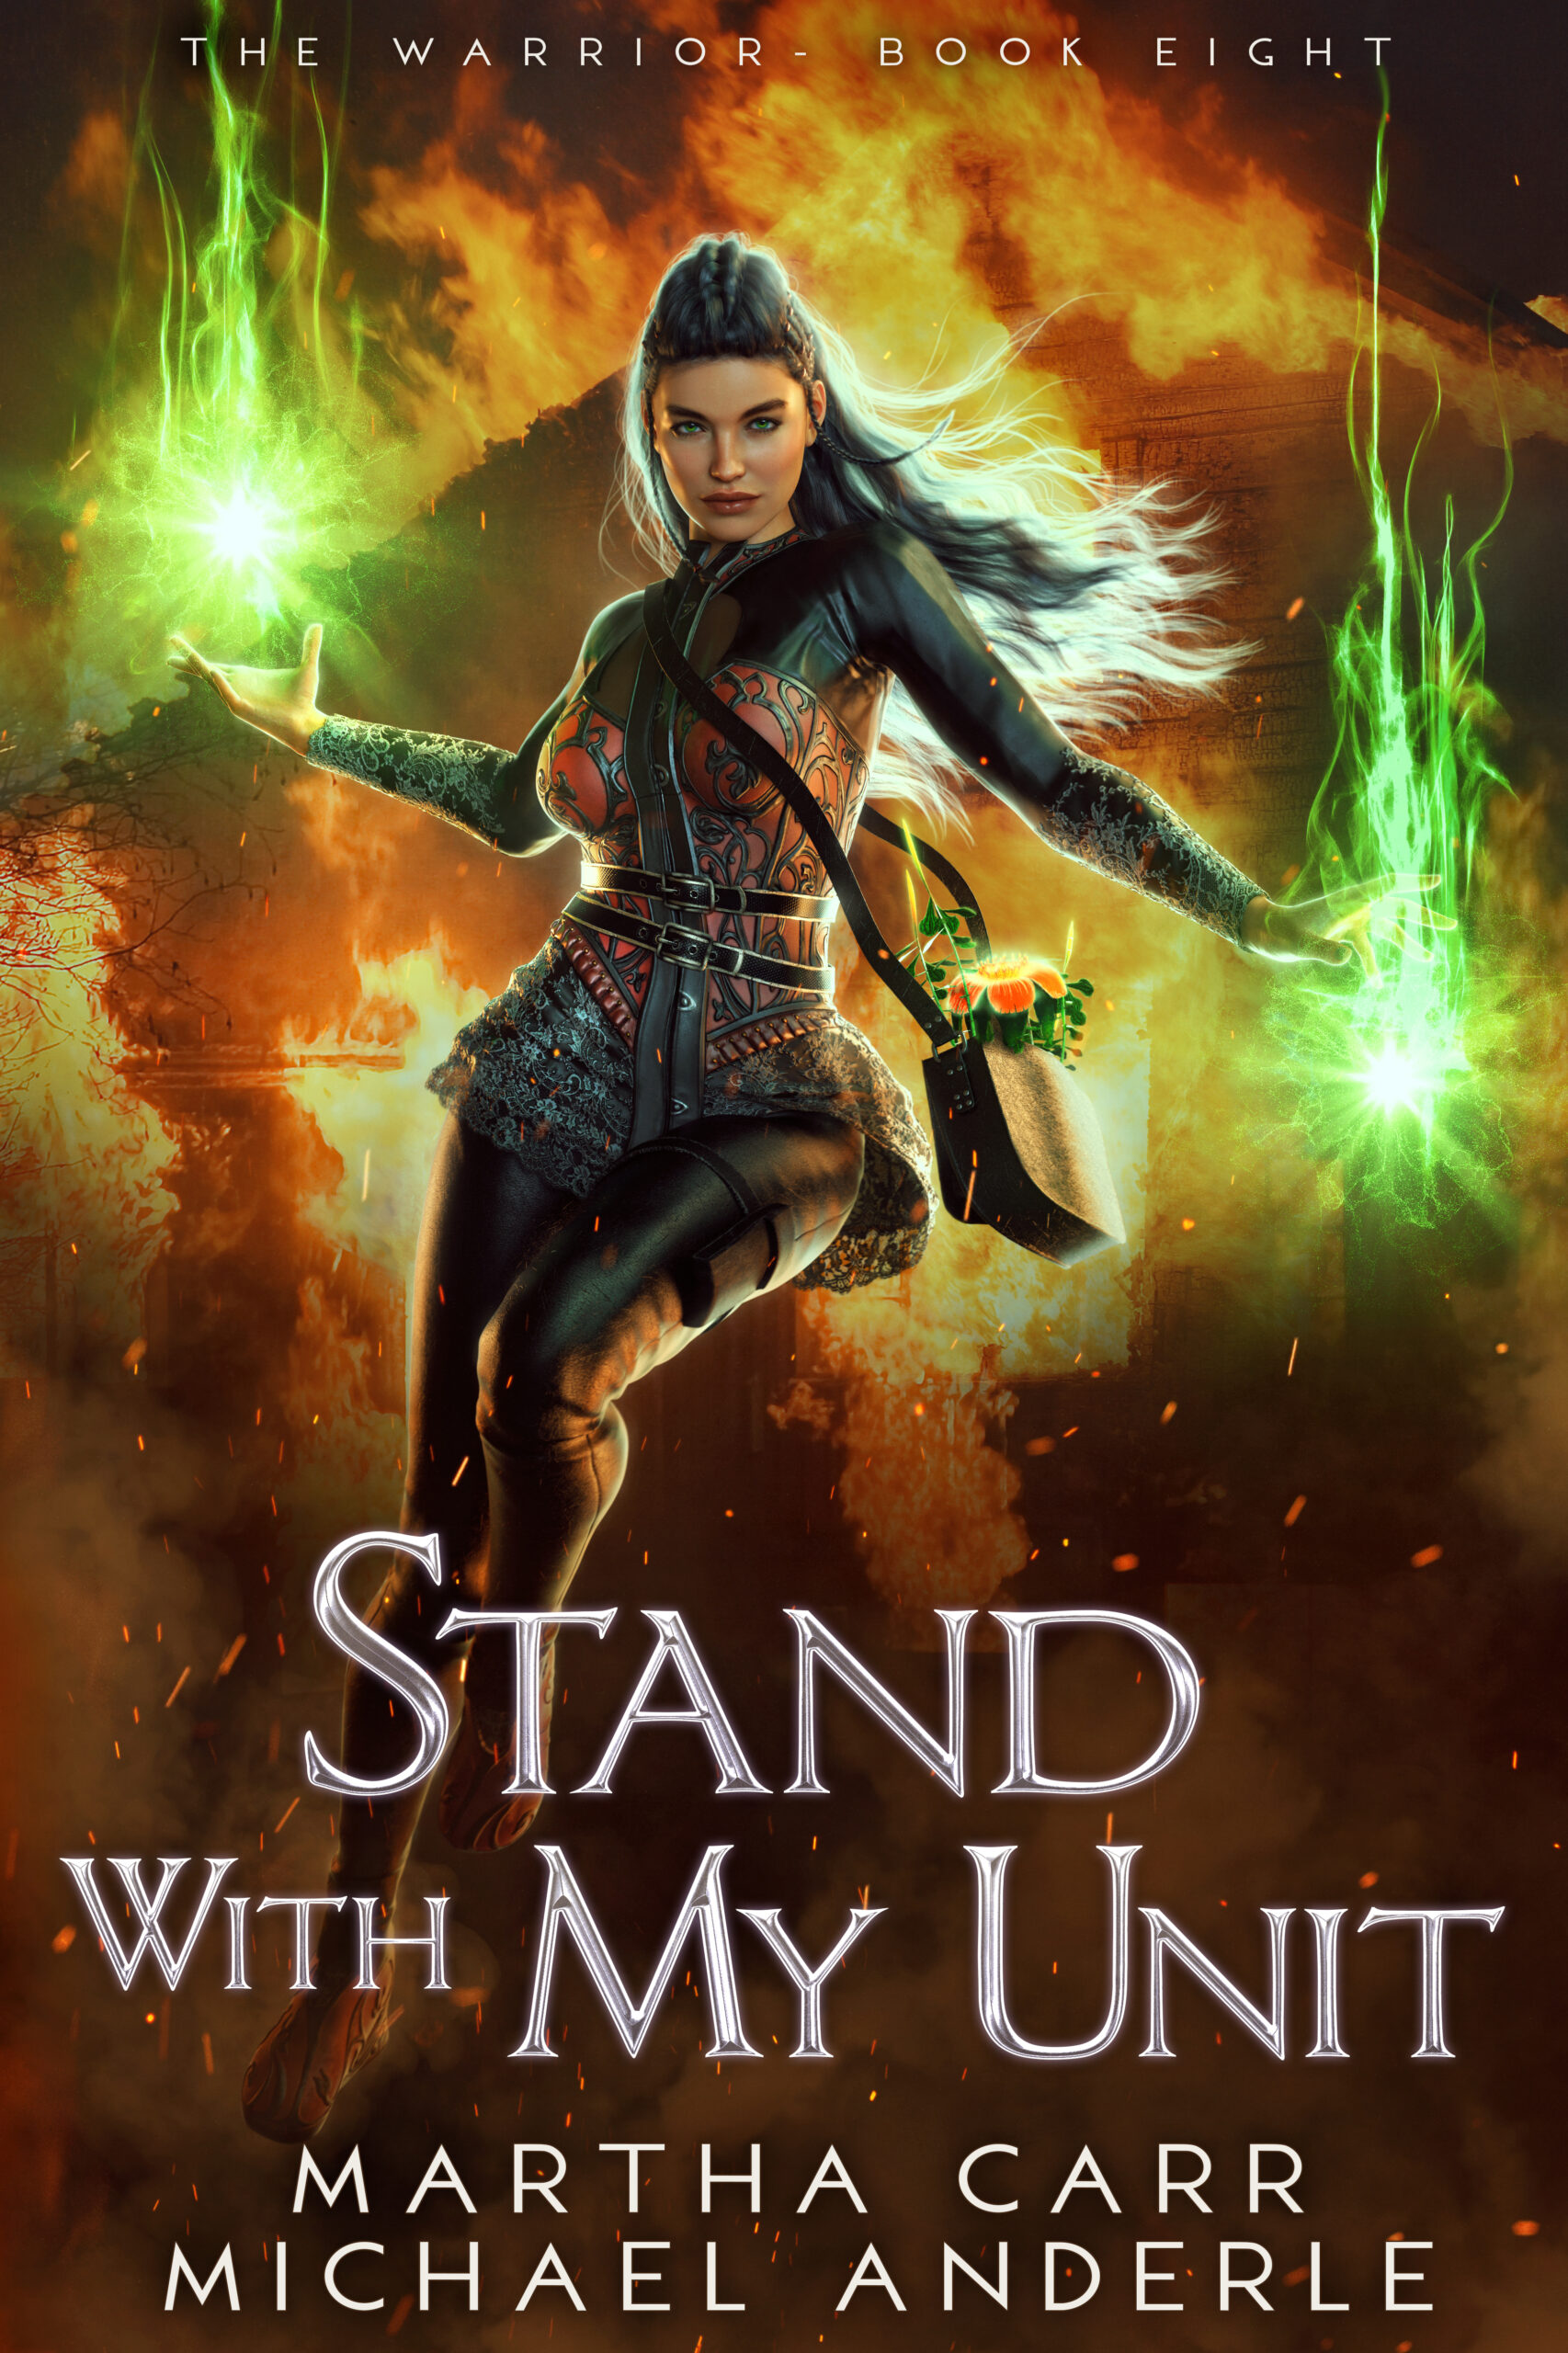 08 Stand With My Unit - The Warrior 8 E-book